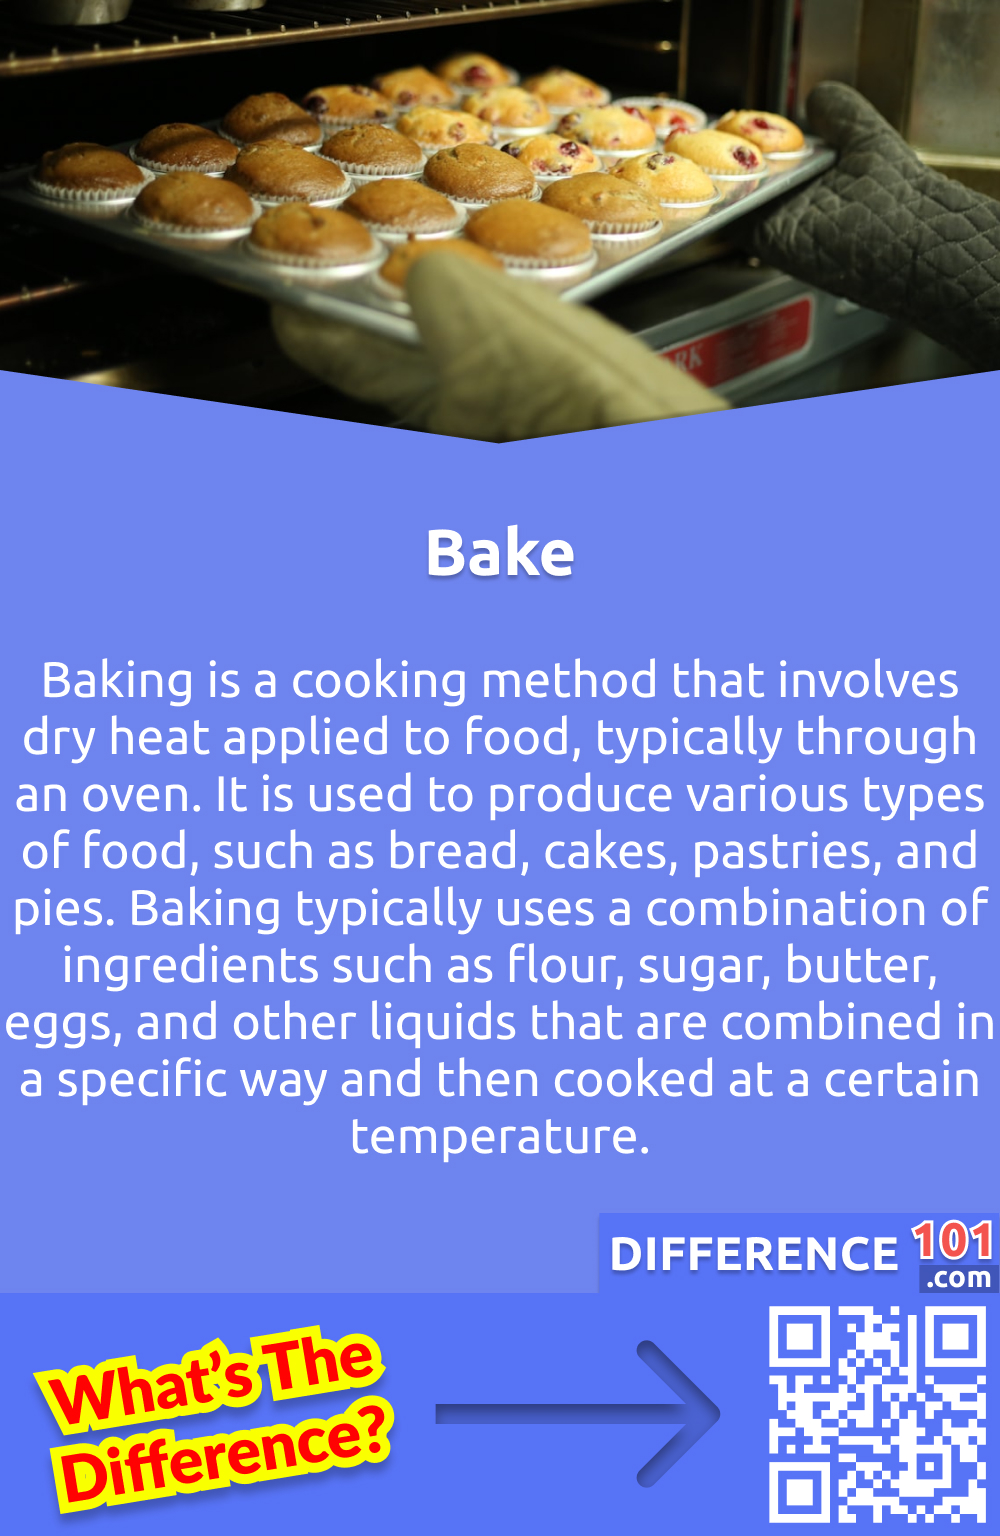 What Is Bake? Baking is a cooking method that involves dry heat applied to food, typically through an oven. It is used to produce various types of food, such as bread, cakes, pastries, and pies. Baking typically uses a combination of ingredients such as flour, sugar, butter, eggs, and other liquids that are combined in a specific way and then cooked at a certain temperature. Baking is an efficient and reliable way of producing a wide variety of foods, from savoury dishes to sweet desserts. It is an art in itself and requires the baker to have knowledge in the properties of ingredients and how to mix them to produce a desired result. Baking is an enjoyable and rewarding experience, and with practice and dedication, anyone can master the art of baking.